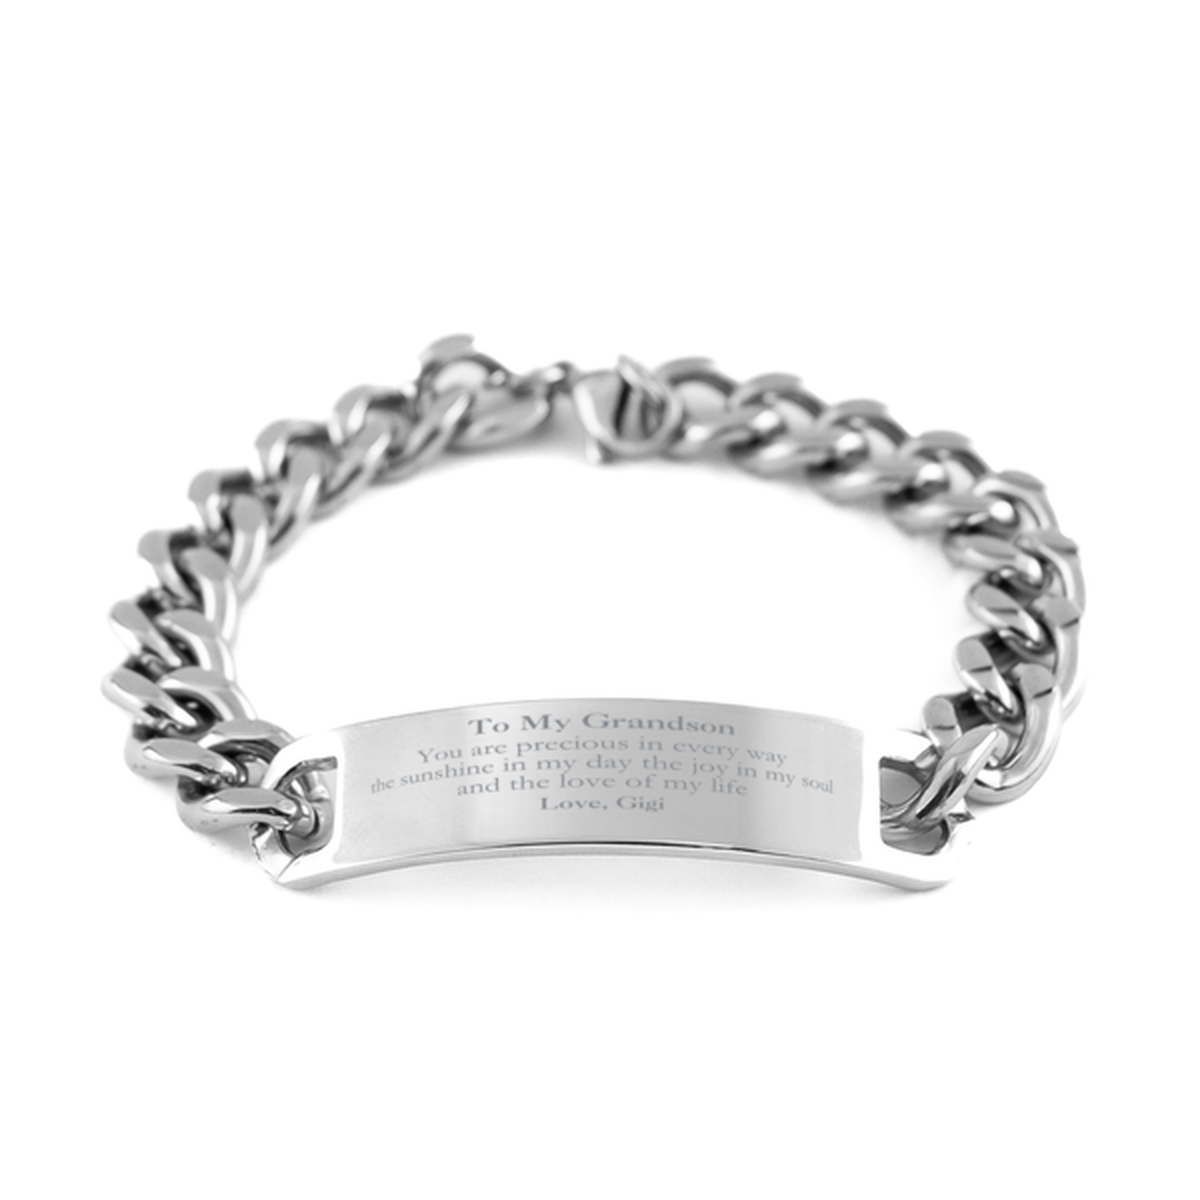 Graduation Gifts for Grandson Cuban Chain Stainless Steel Bracelet Present from Gigi, Christmas Grandson Birthday Gifts Grandson You are precious in every way the sunshine in my day. Love, Gigi